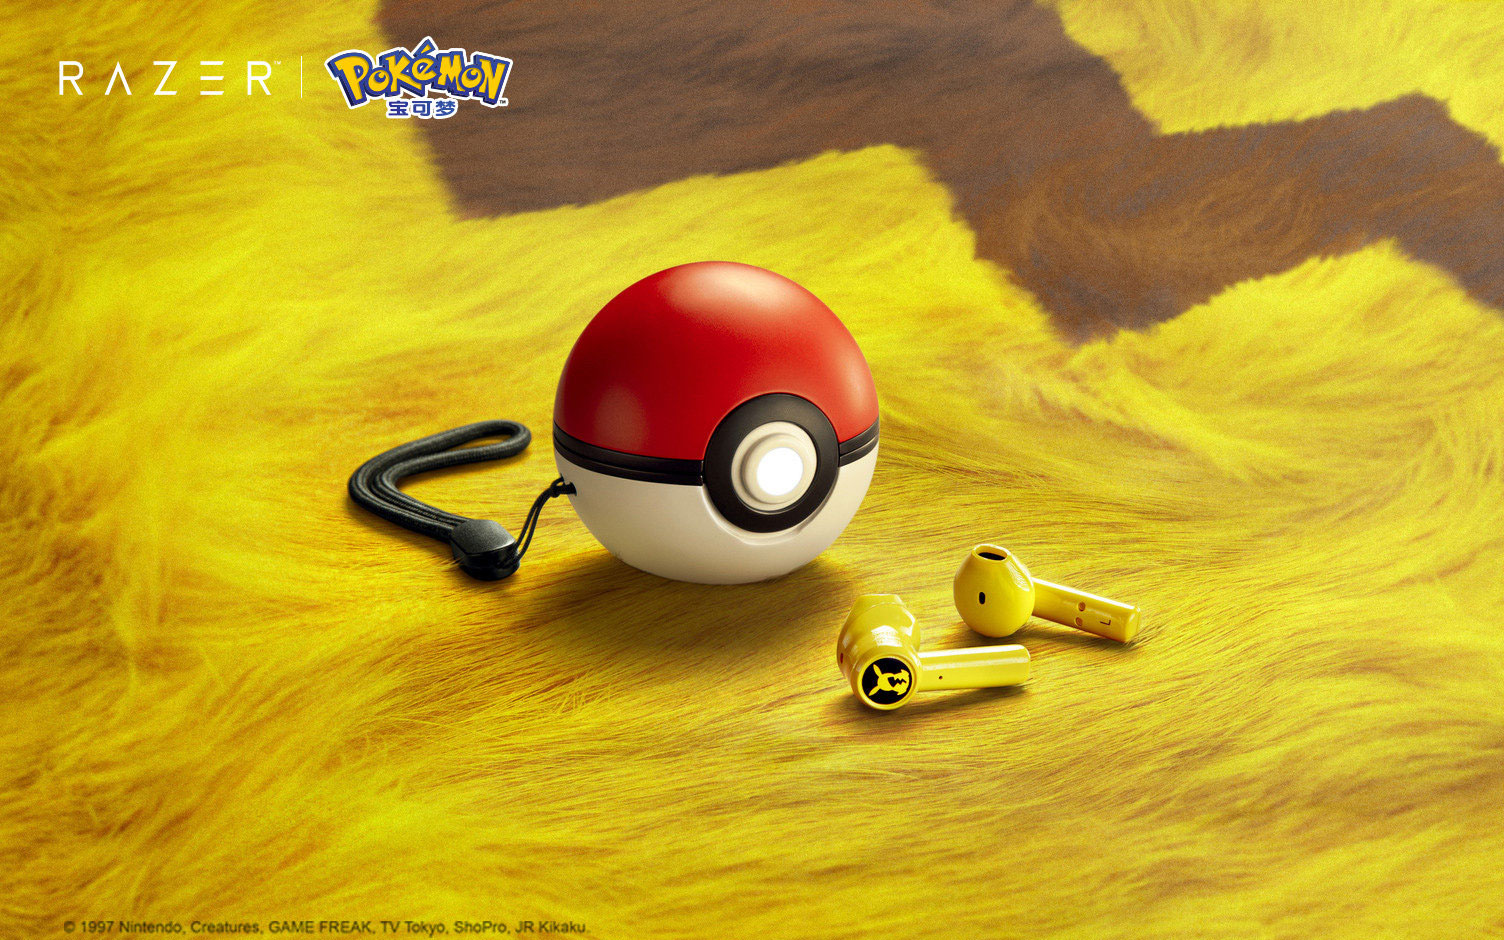 Razer S Pikachu Wireless Earbuds Are Stored In A Poke Ball Wilson S Media - 2 music id codes for roblox cradles and freak youtube